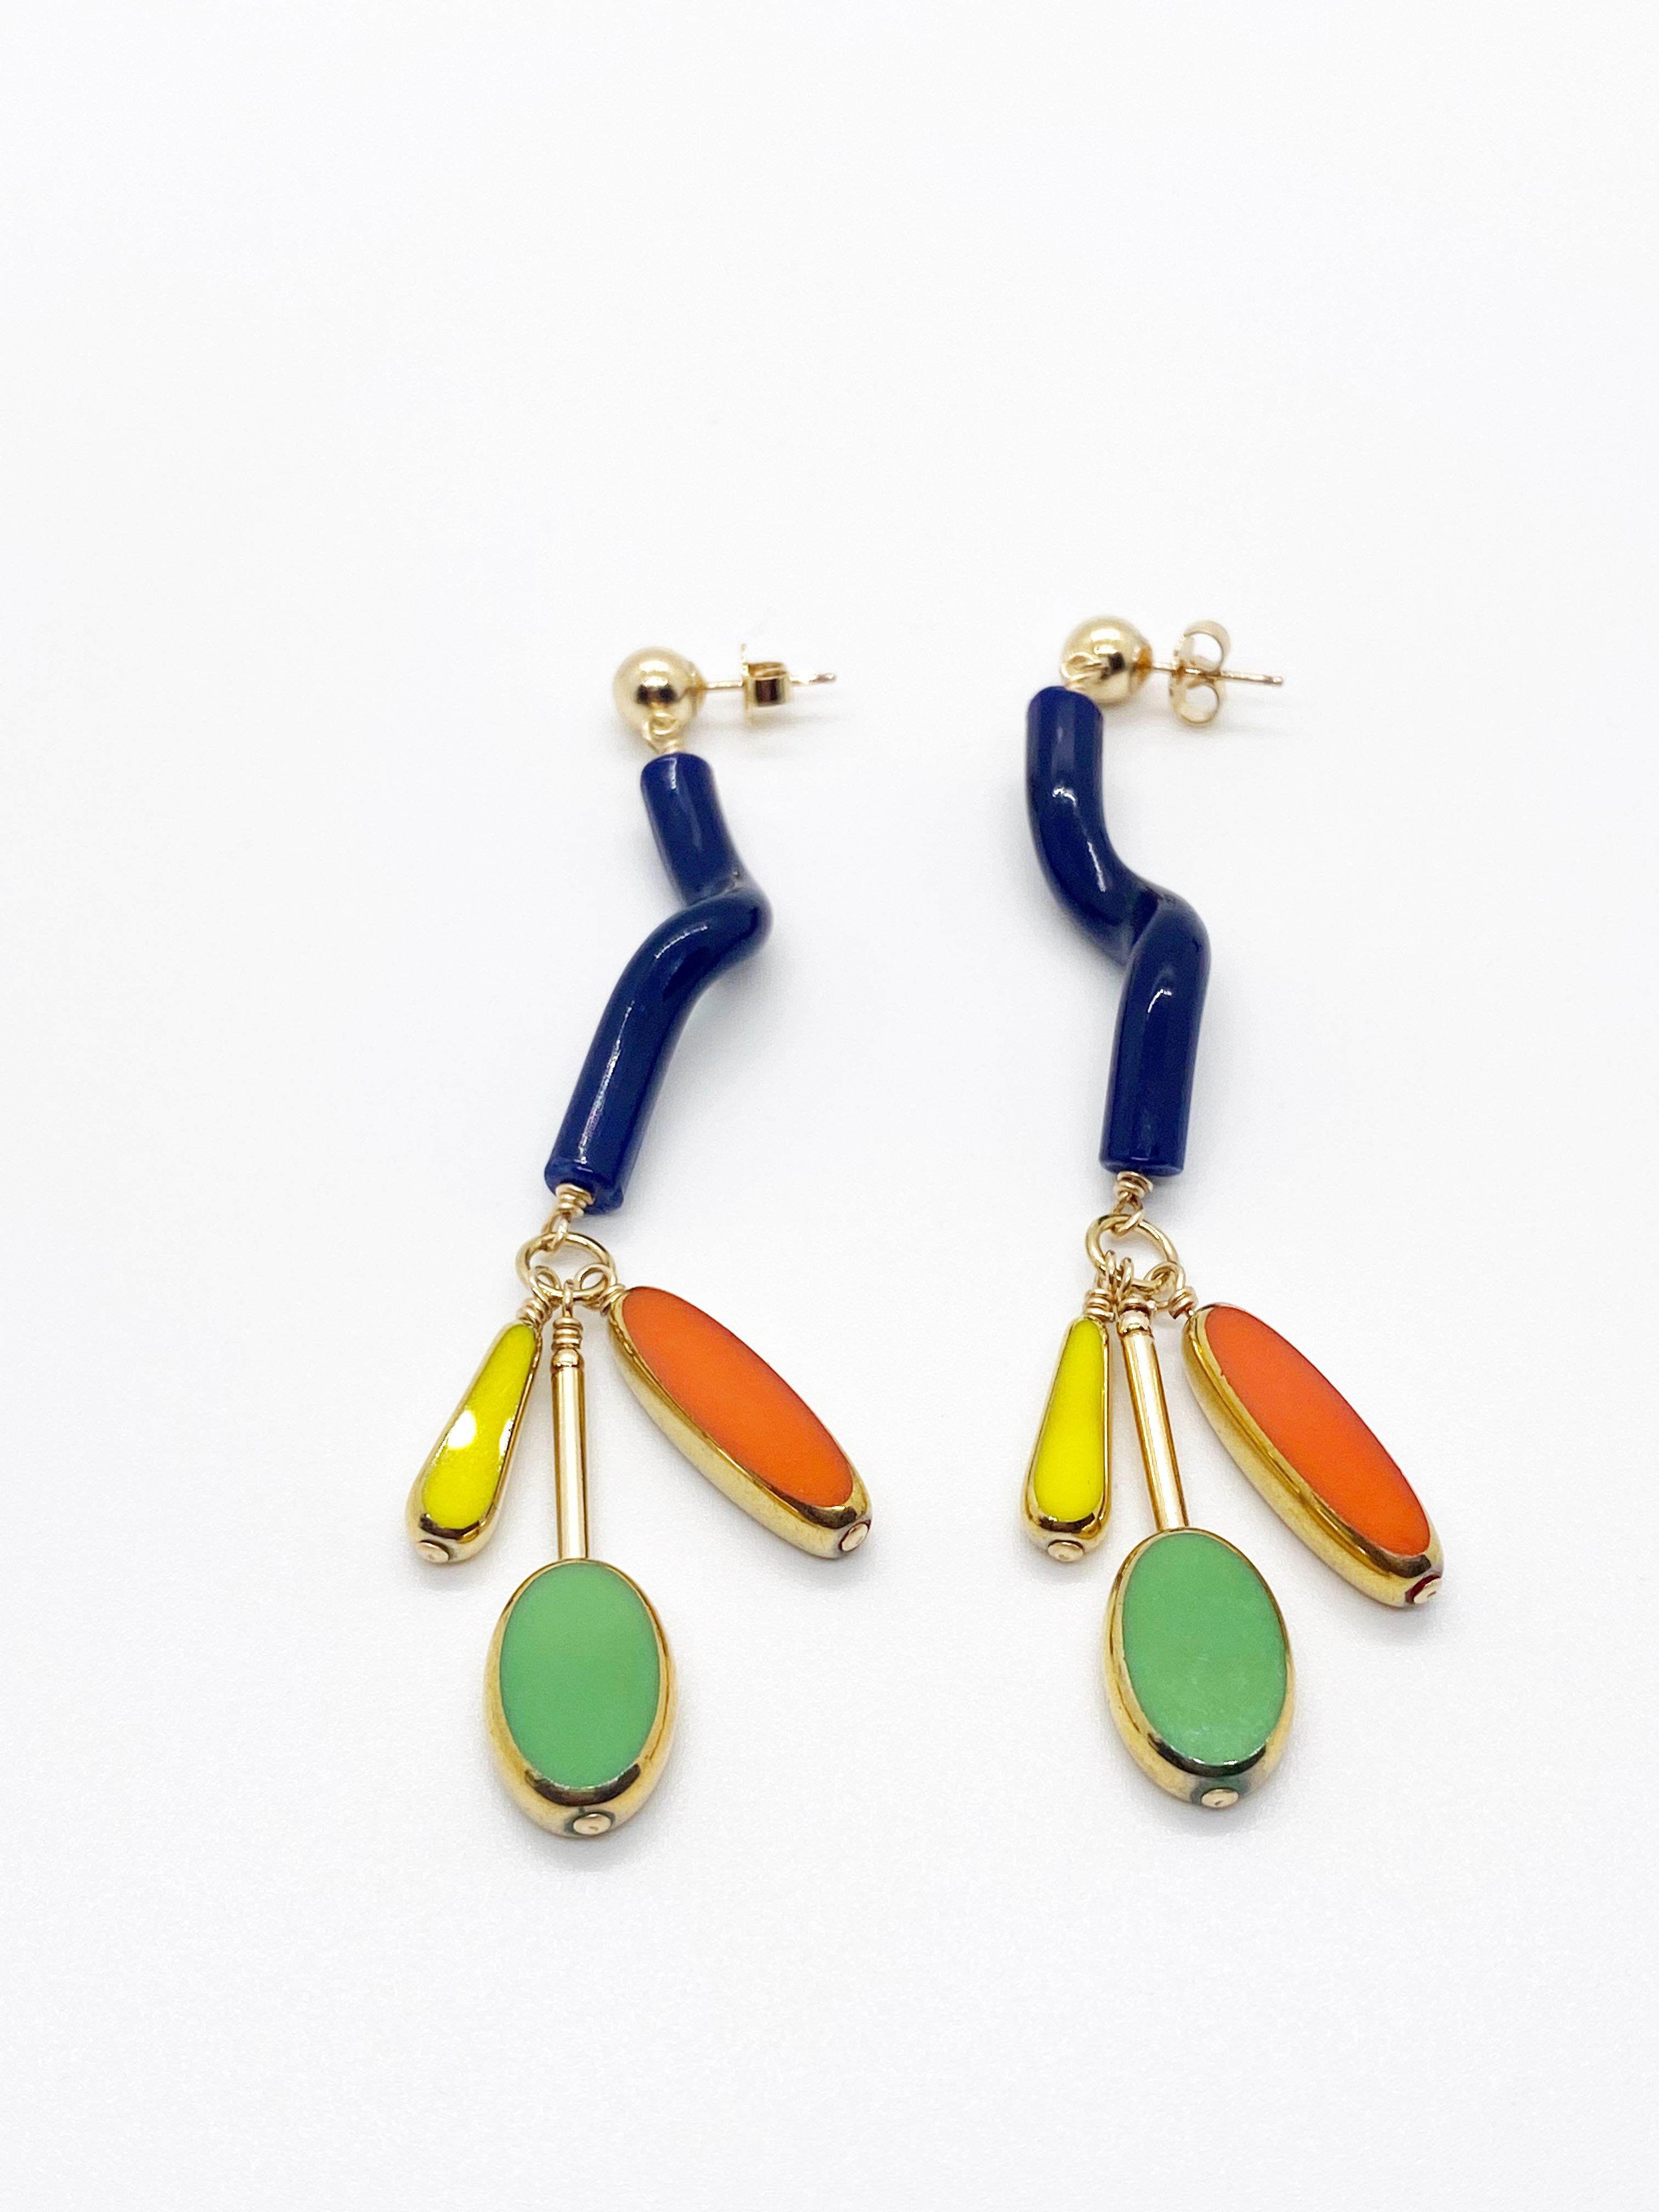 These are such fun earrings. These earrings will sure be a conversation starter. It consist of vintage noodle glass beads with 3 bright vintage glass beads that are edge with 24K gold and finished with 14K gold filled stud.

The vintage German beads